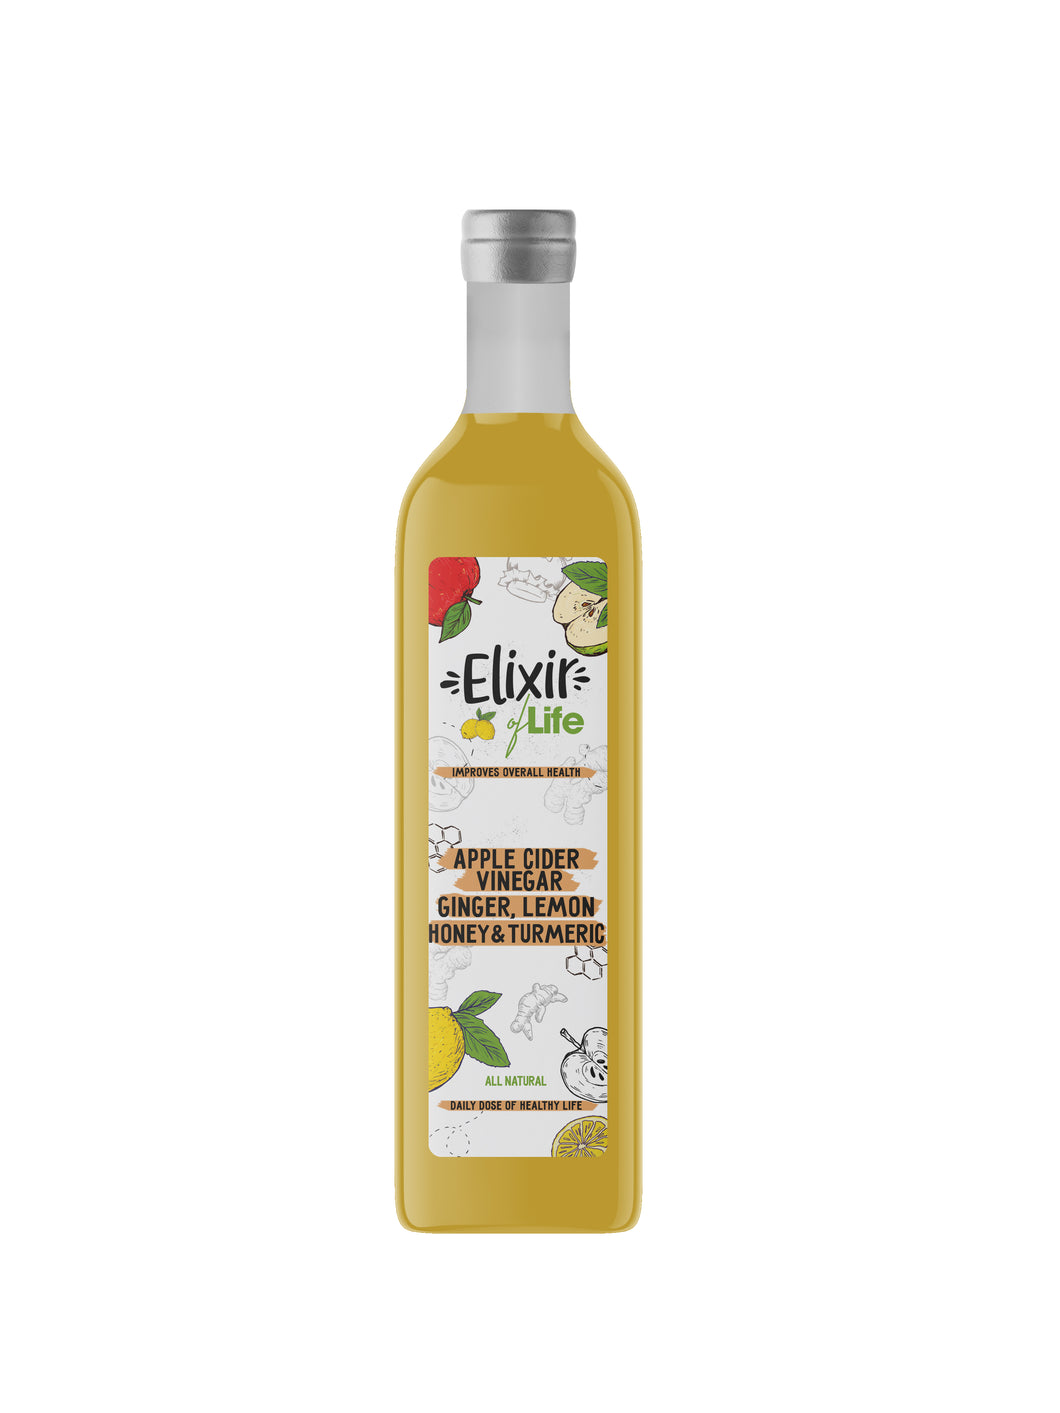 Elixir of Life! Premium Health Booster Packed with Apple Cider Vinegar, Ginger, Honey, Lemon & Turmeric - Hand-Crafted, Healthy Natural Drinks 500 ml (33 Servings)